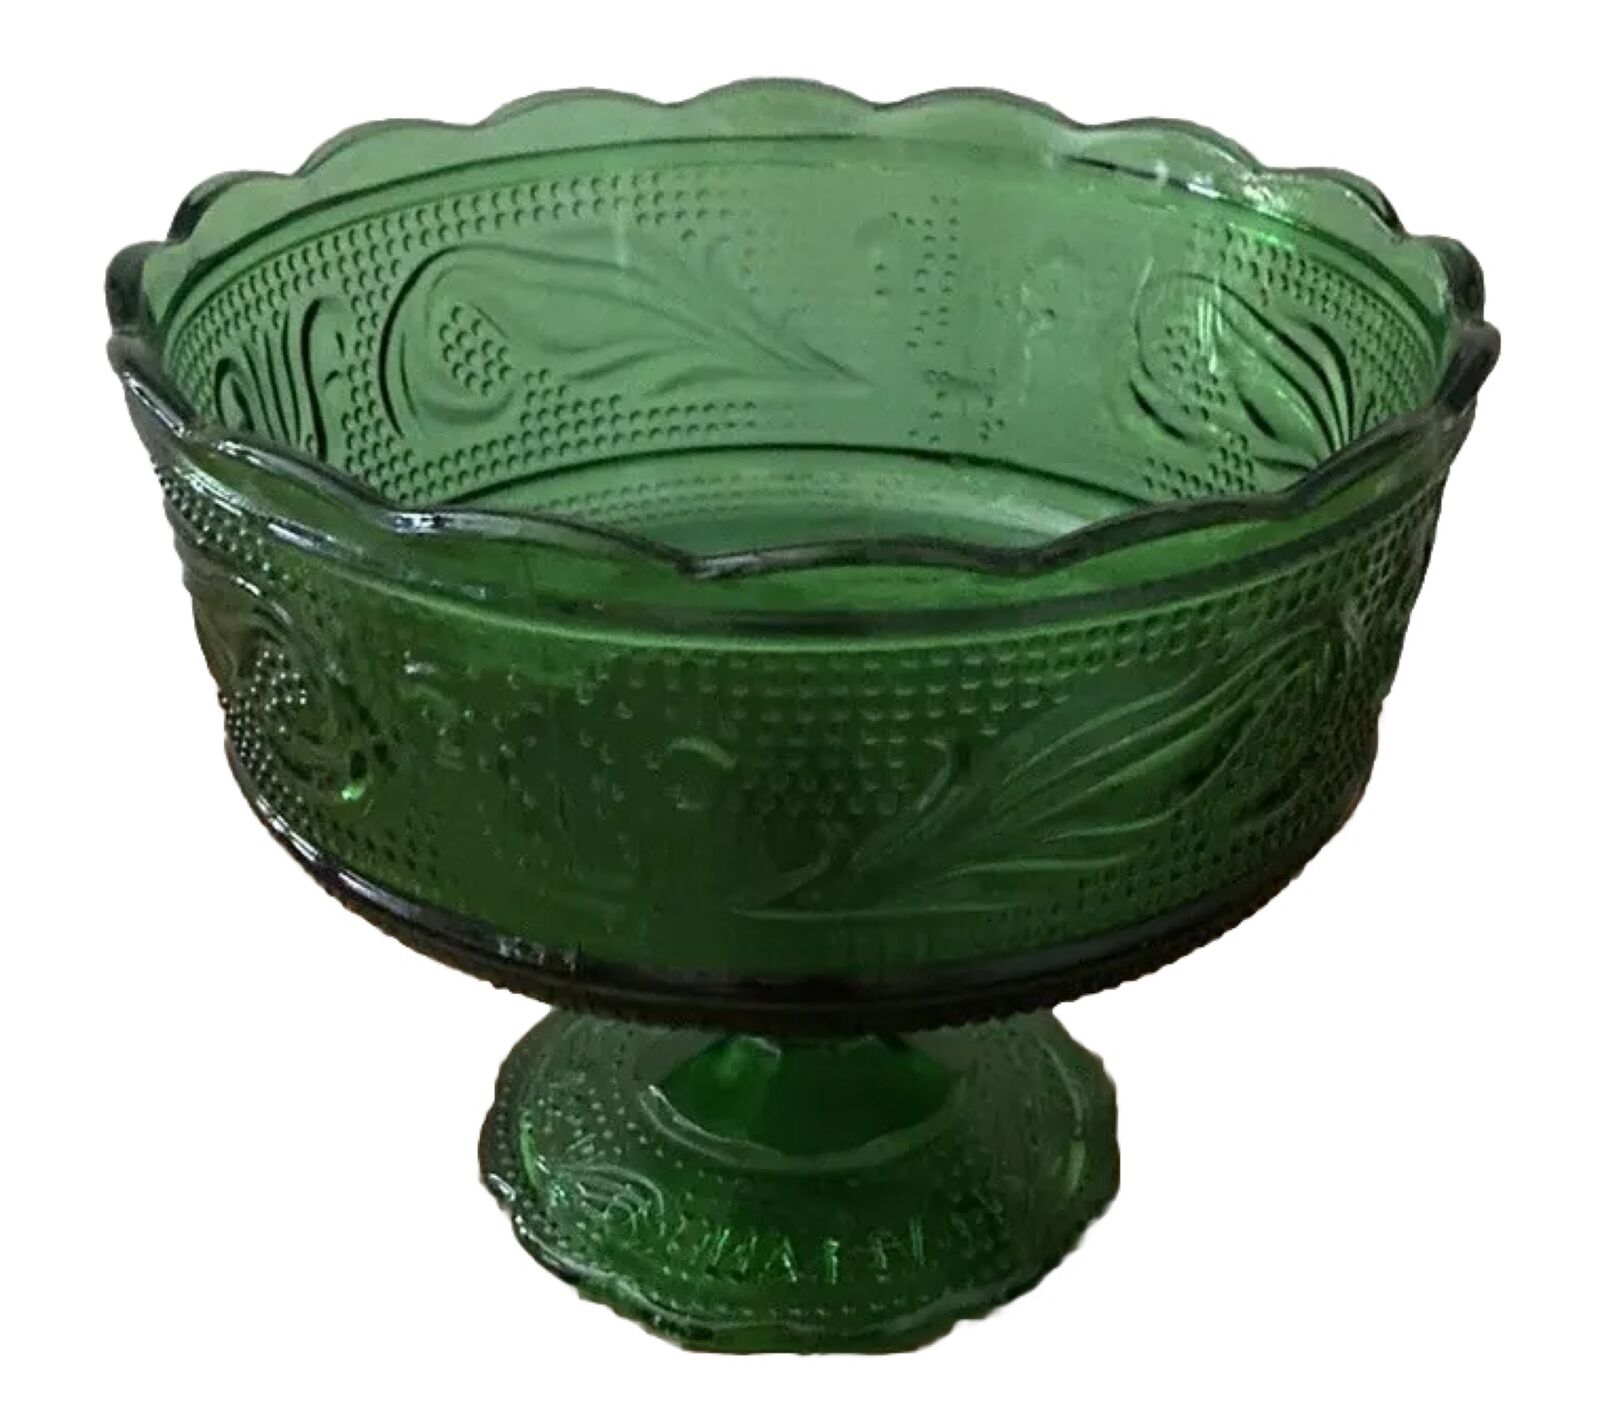 Vintage E.O. Brody Green Glass Pedestal Compote Candy Dish Footed Bowl USA